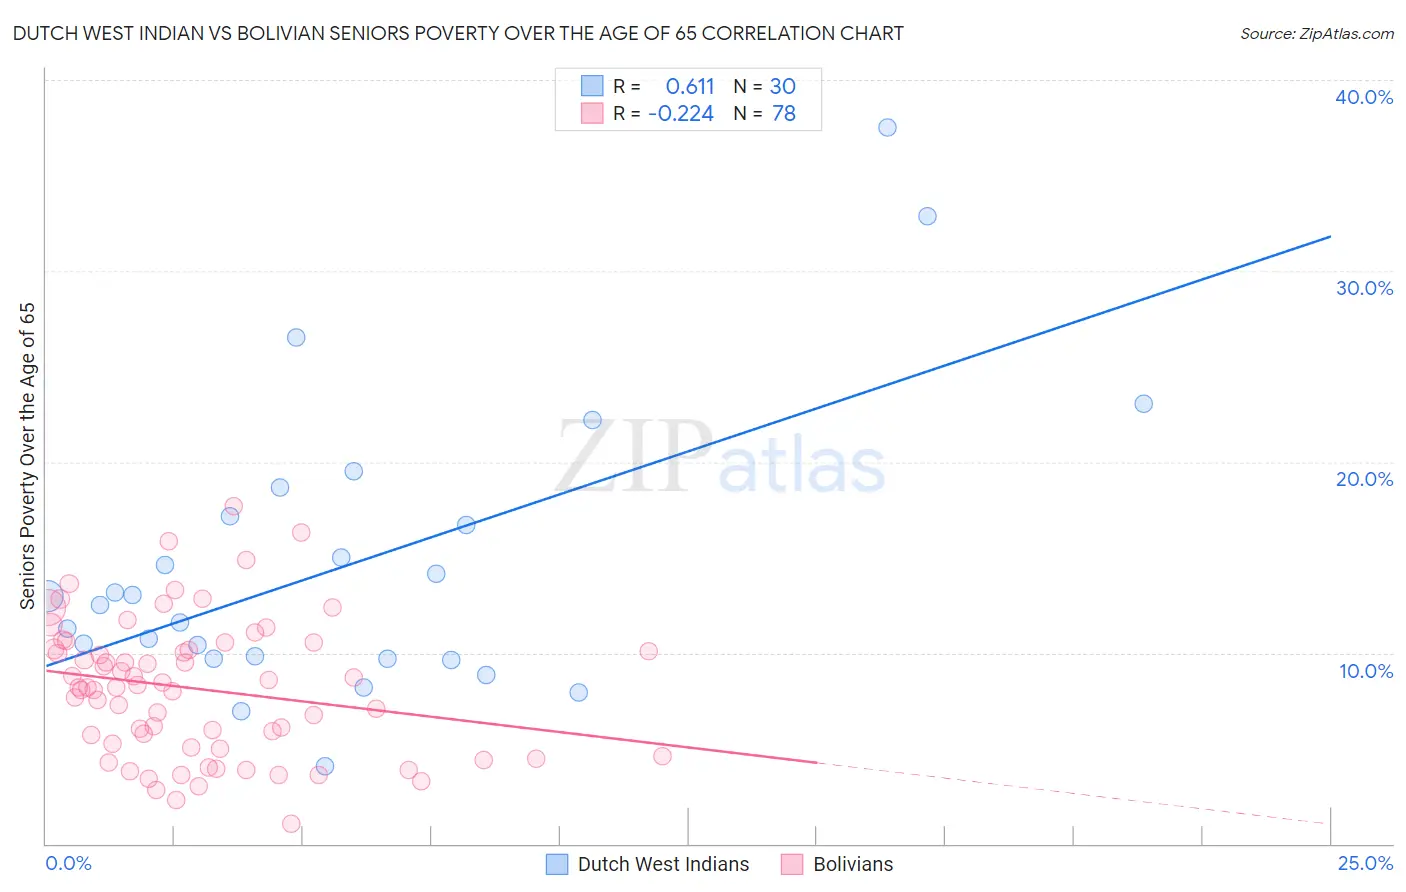 Dutch West Indian vs Bolivian Seniors Poverty Over the Age of 65